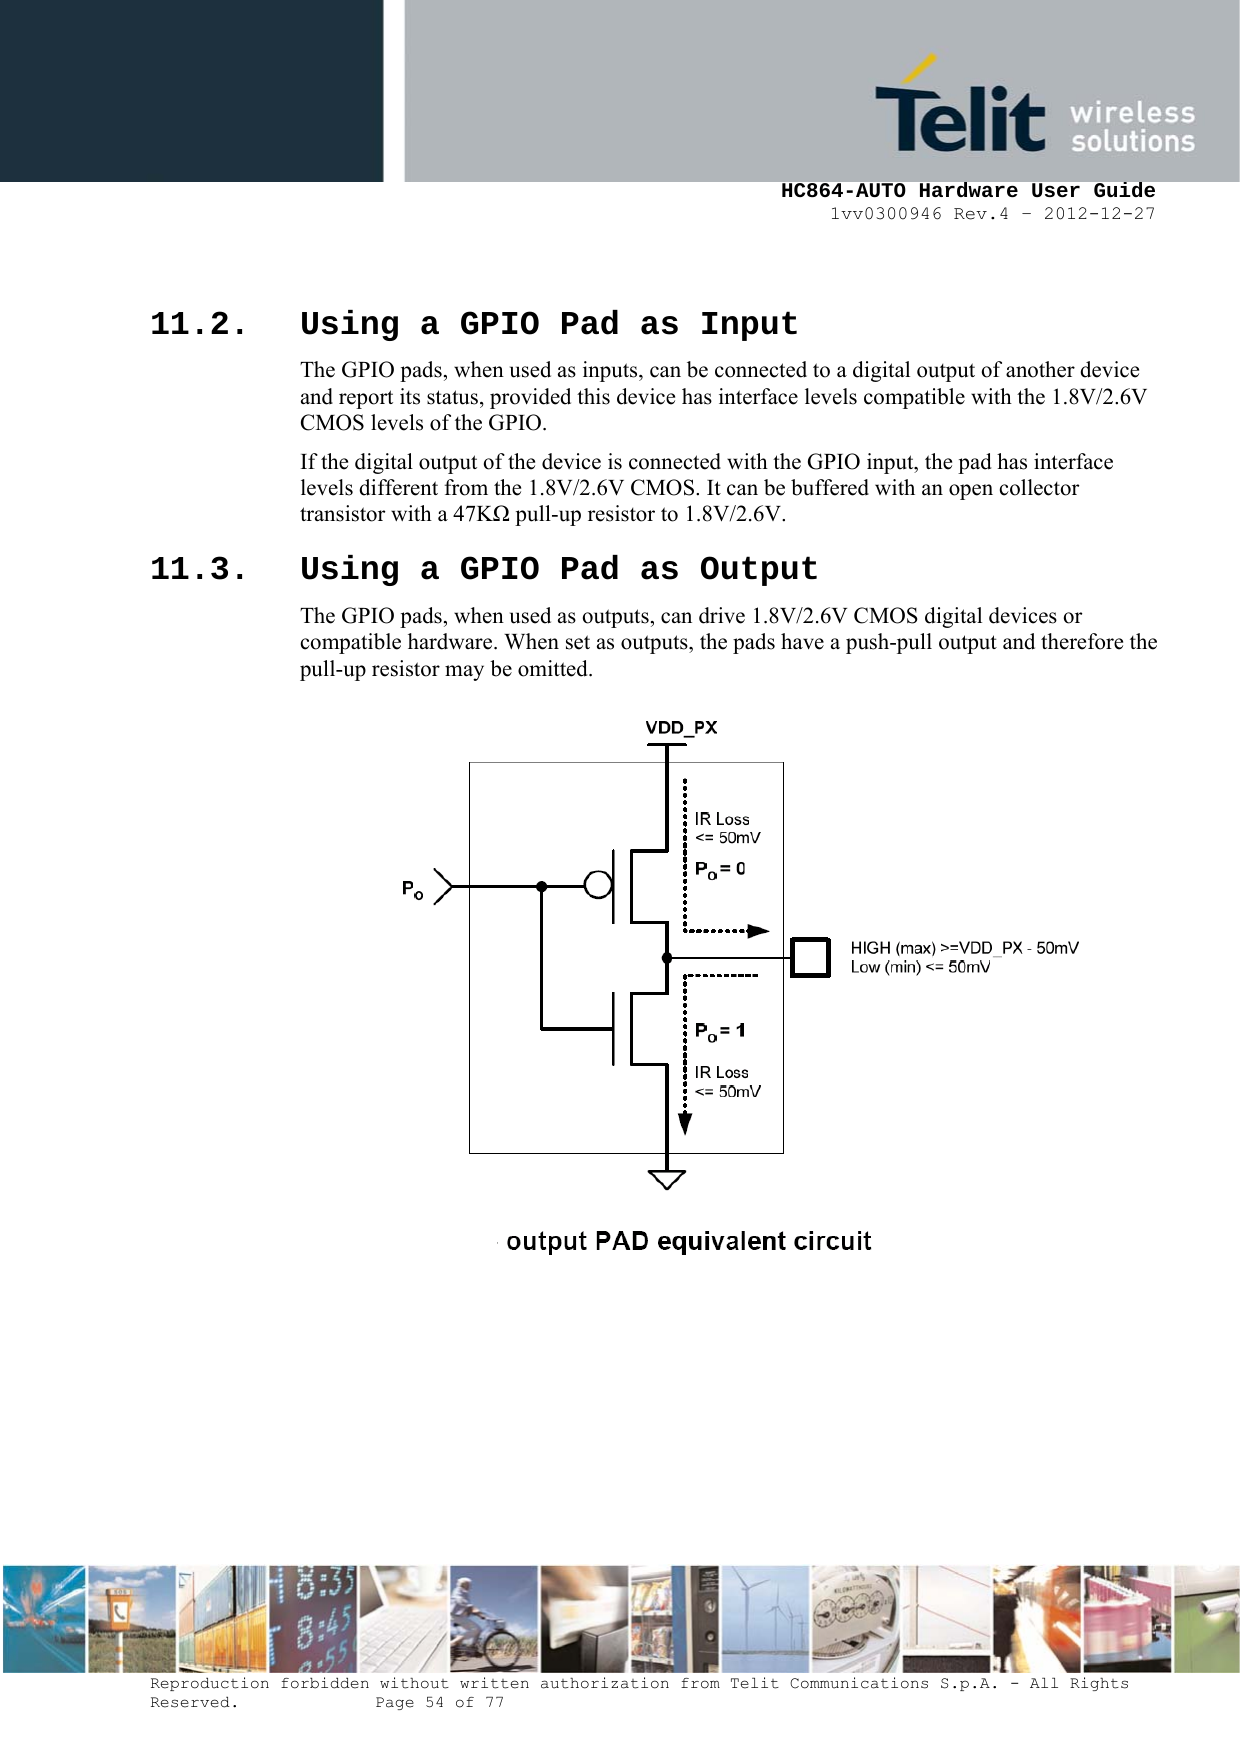     HC864-AUTO Hardware User Guide 1vv0300946 Rev.4 – 2012-12-27 Reproduction forbidden without written authorization from Telit Communications S.p.A. - All Rights Reserved.    Page 54 of 77   11.2. Using a GPIO Pad as Input The GPIO pads, when used as inputs, can be connected to a digital output of another device and report its status, provided this device has interface levels compatible with the 1.8V/2.6V CMOS levels of the GPIO.  If the digital output of the device is connected with the GPIO input, the pad has interface levels different from the 1.8V/2.6V CMOS. It can be buffered with an open collector transistor with a 47K pull-up resistor to 1.8V/2.6V. 11.3. Using a GPIO Pad as Output The GPIO pads, when used as outputs, can drive 1.8V/2.6V CMOS digital devices or compatible hardware. When set as outputs, the pads have a push-pull output and therefore the pull-up resistor may be omitted.  